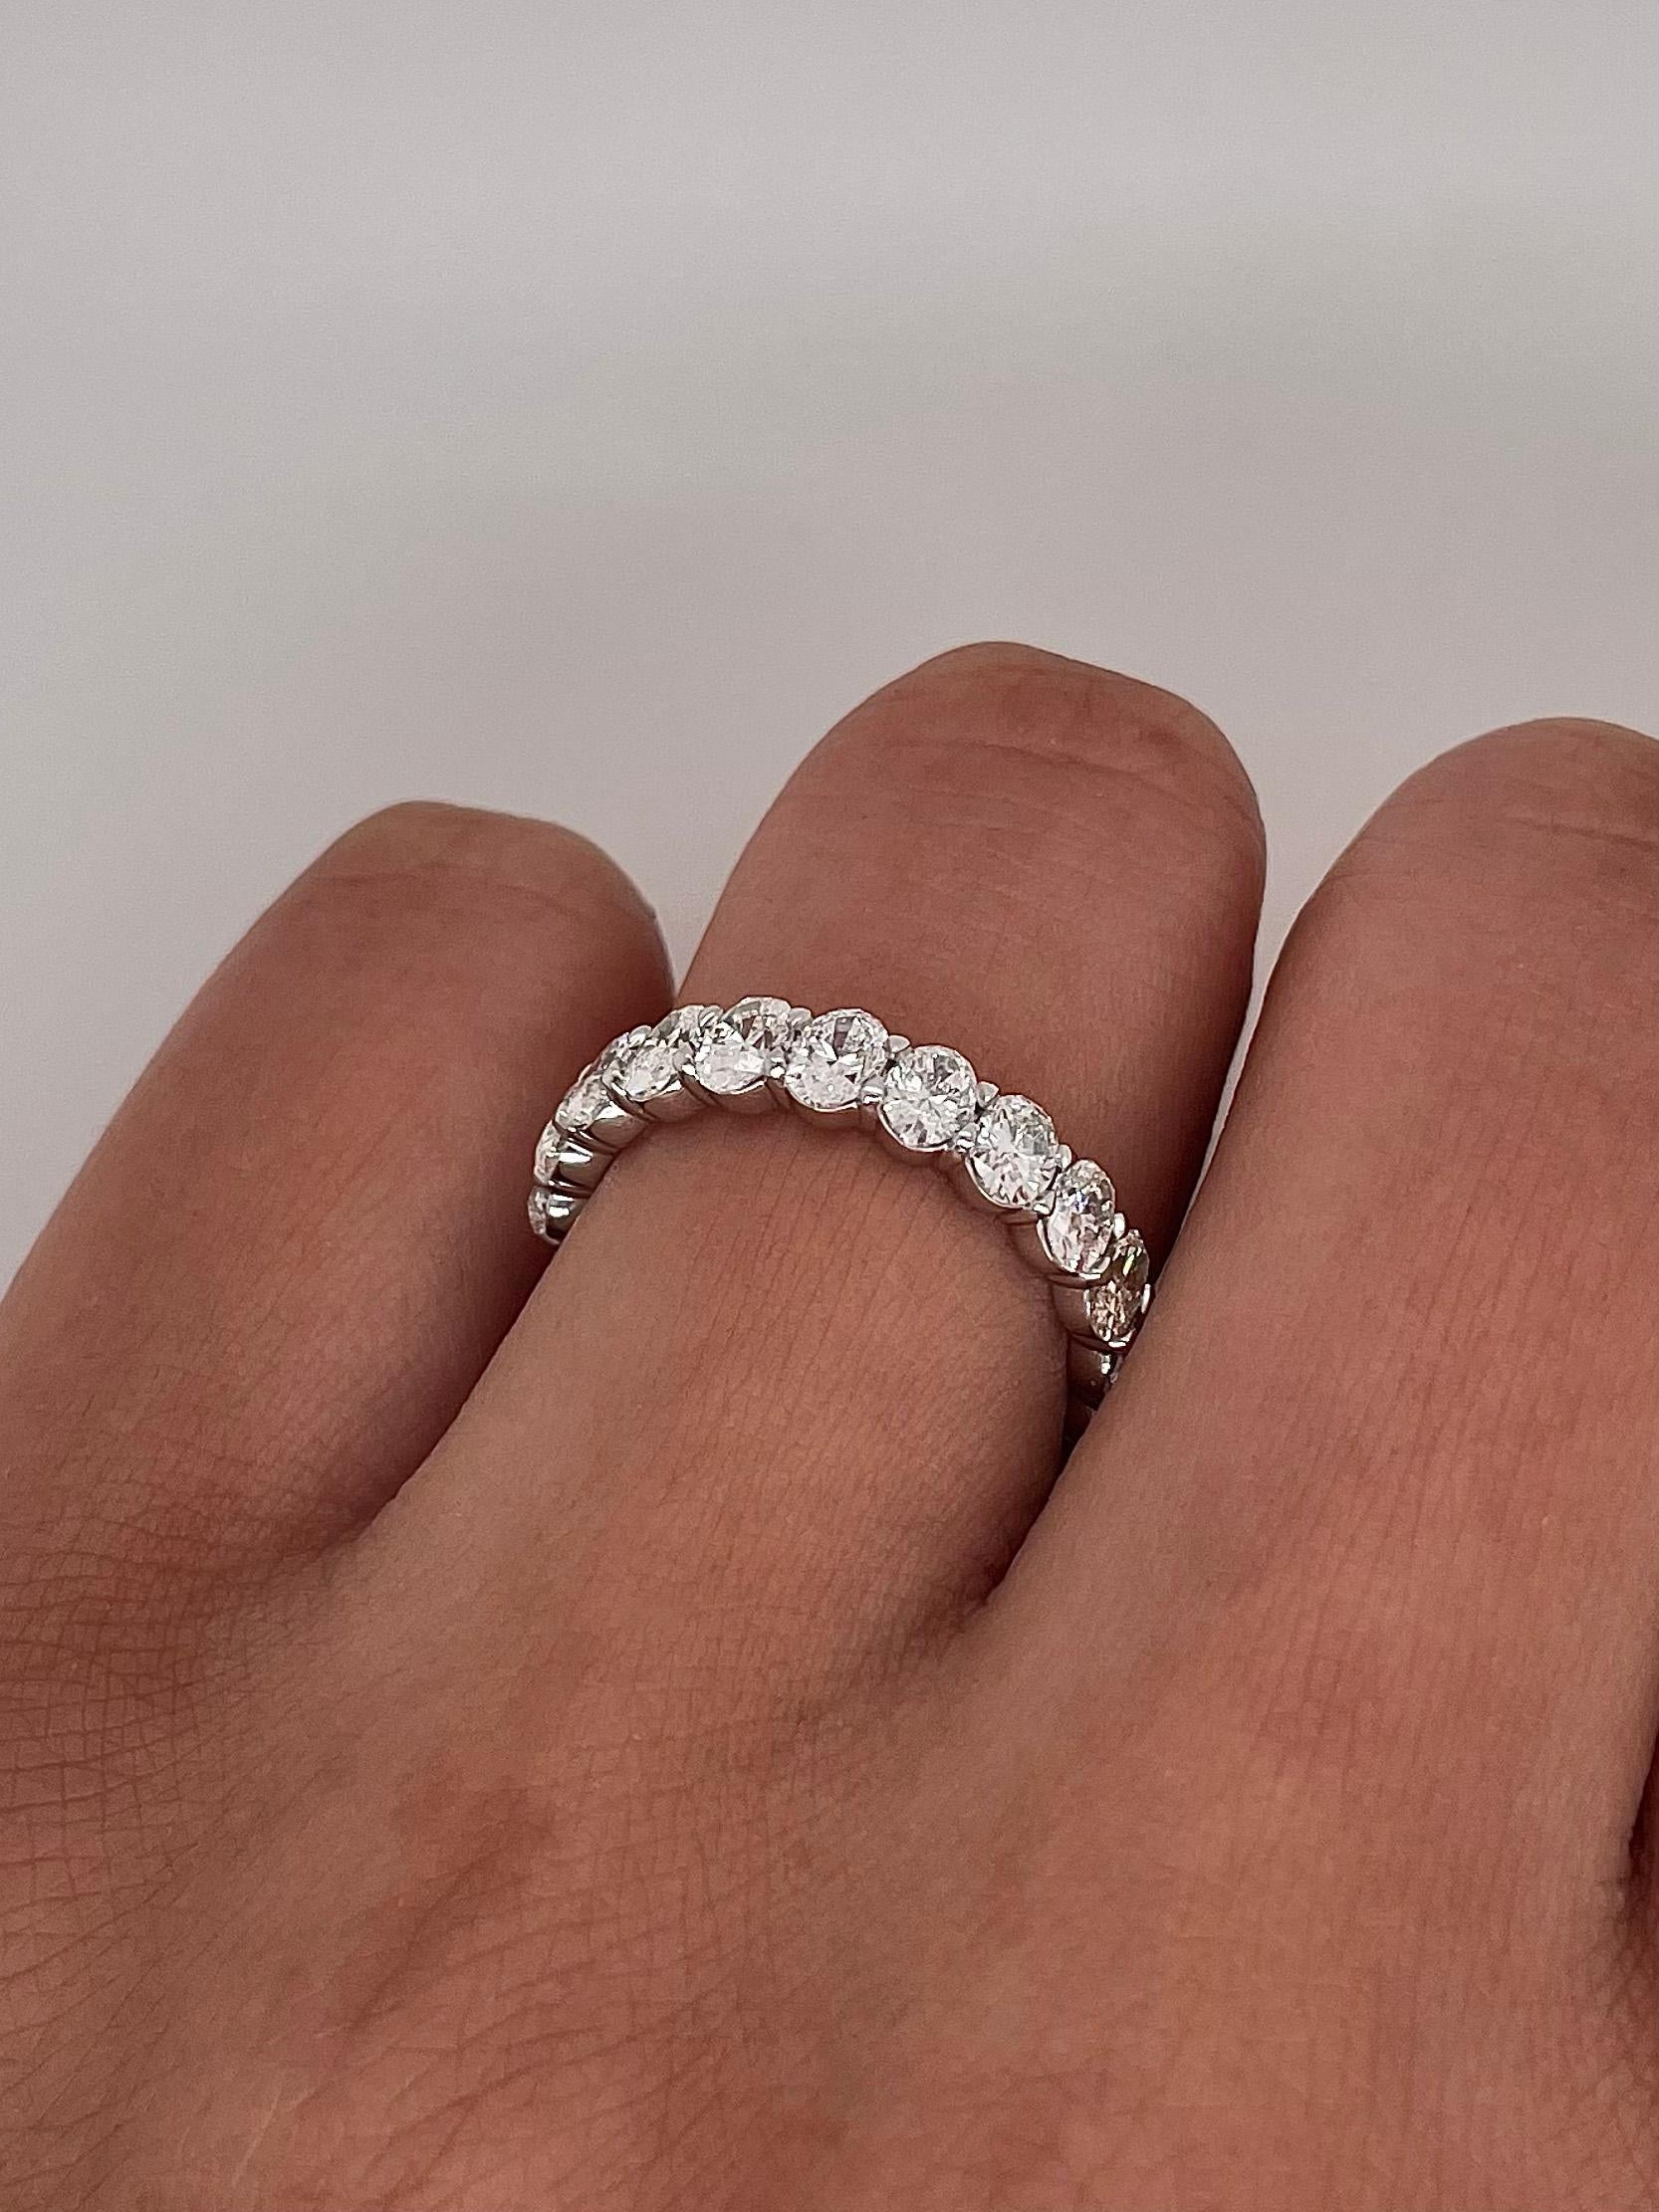 Oval Cut 2.94 Total Carat Shared Prong Diamond Eternity Band in Platinum For Sale